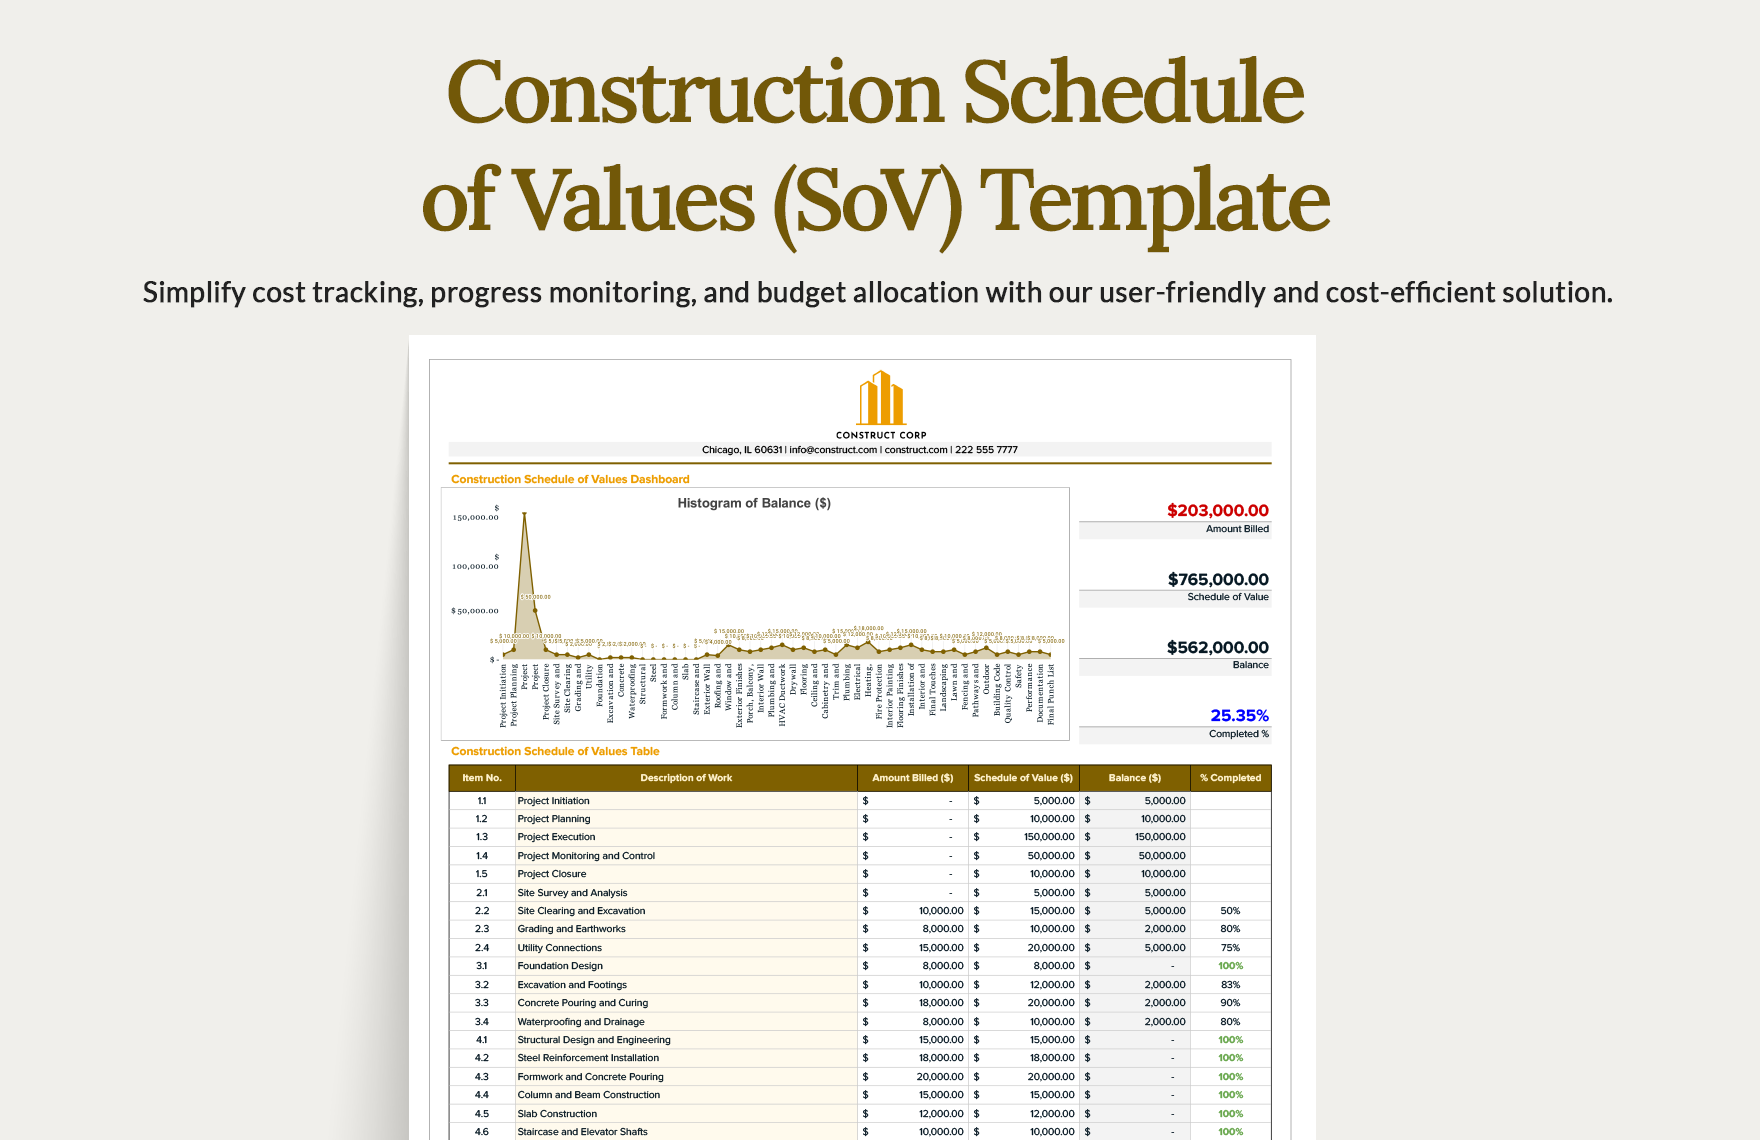 Construction Schedule of Values (SoV) Template